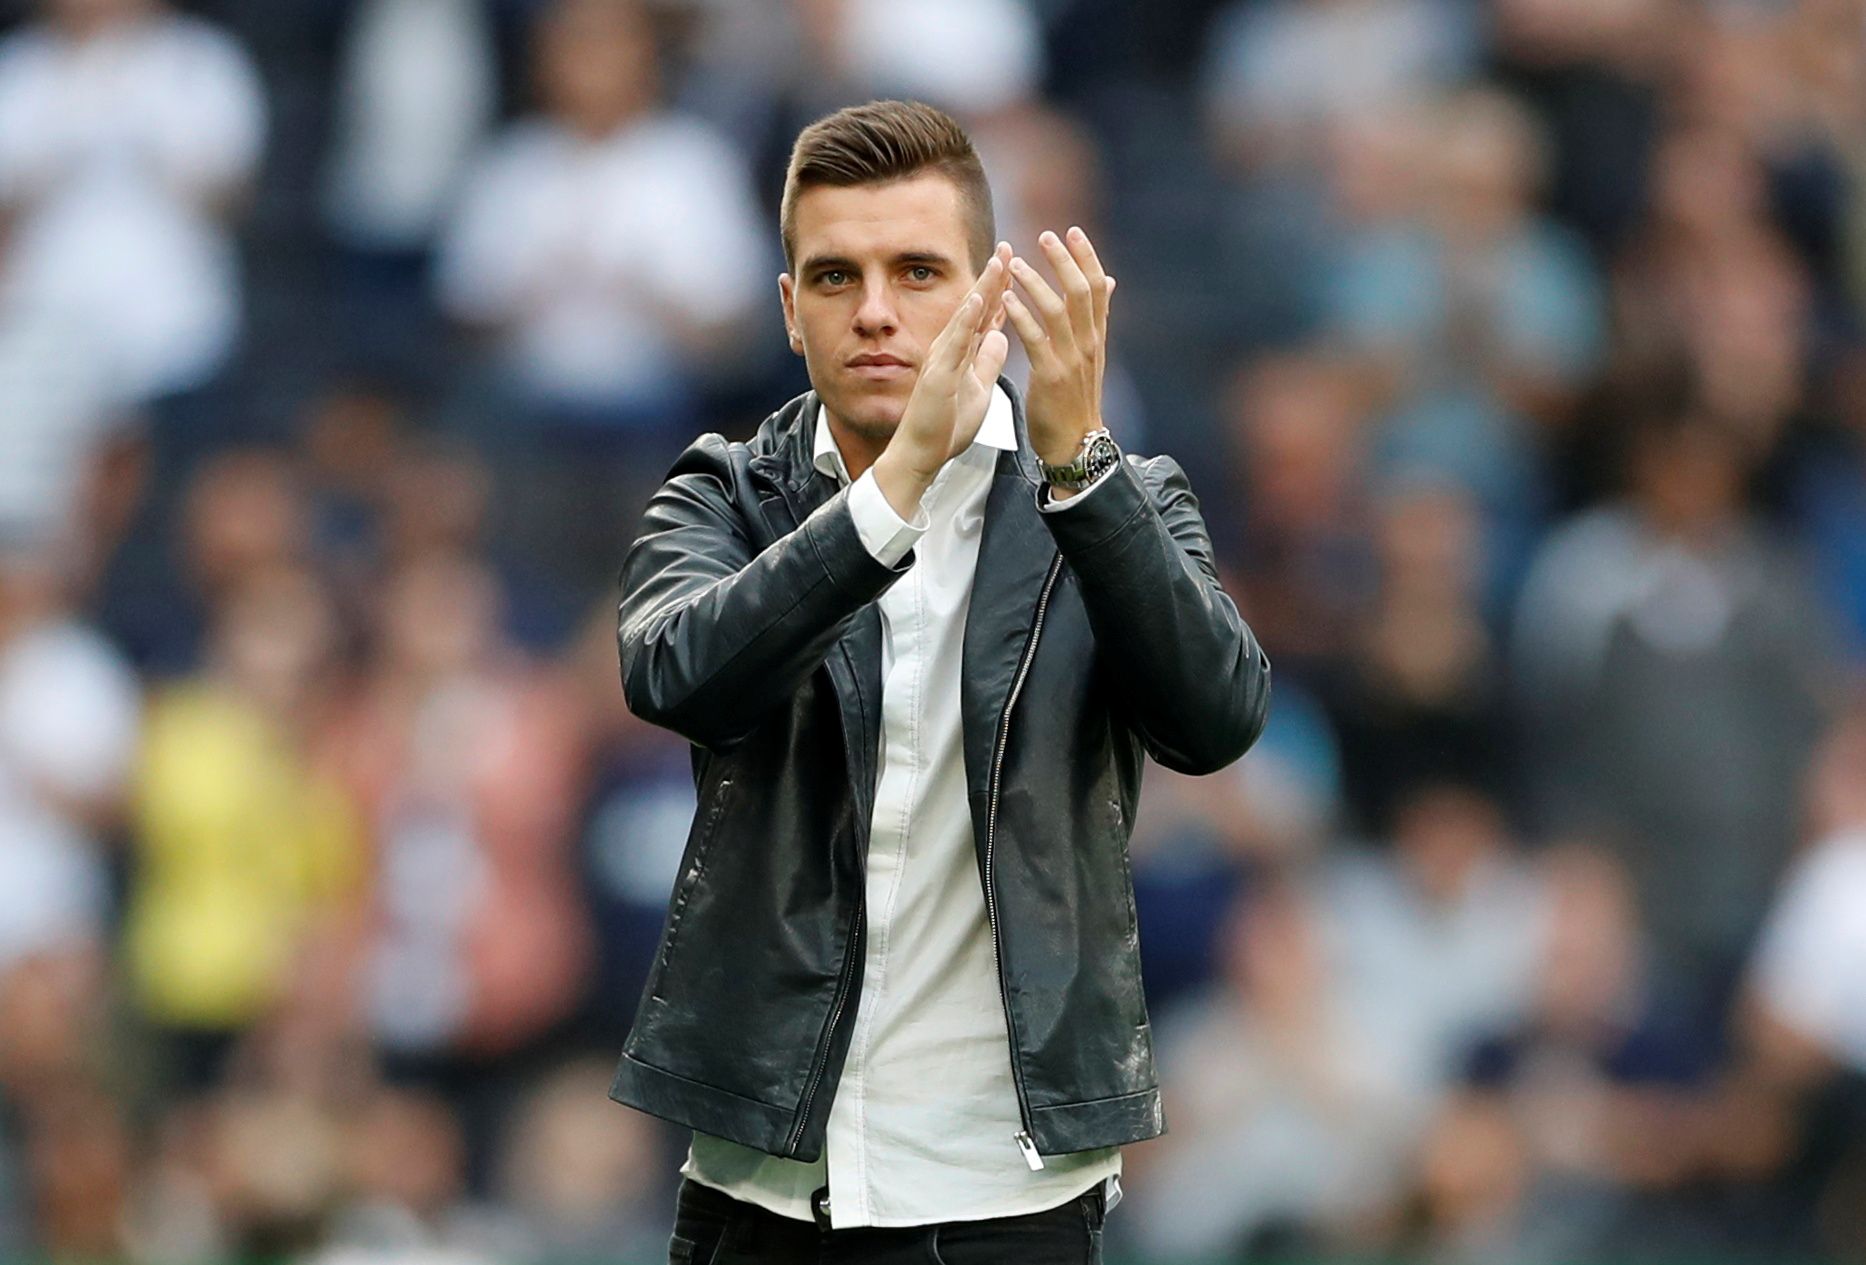 Soccer Football - Premier League - Tottenham Hotspur v Aston Villa - Tottenham Hotspur Stadium, London, Britain - August 10, 2019  Tottenham Hotspur's new signing Giovani Lo Celso is presented before the match  Action Images via Reuters/Matthew Childs  EDITORIAL USE ONLY. No use with unauthorized audio, video, data, fixture lists, club/league logos or 